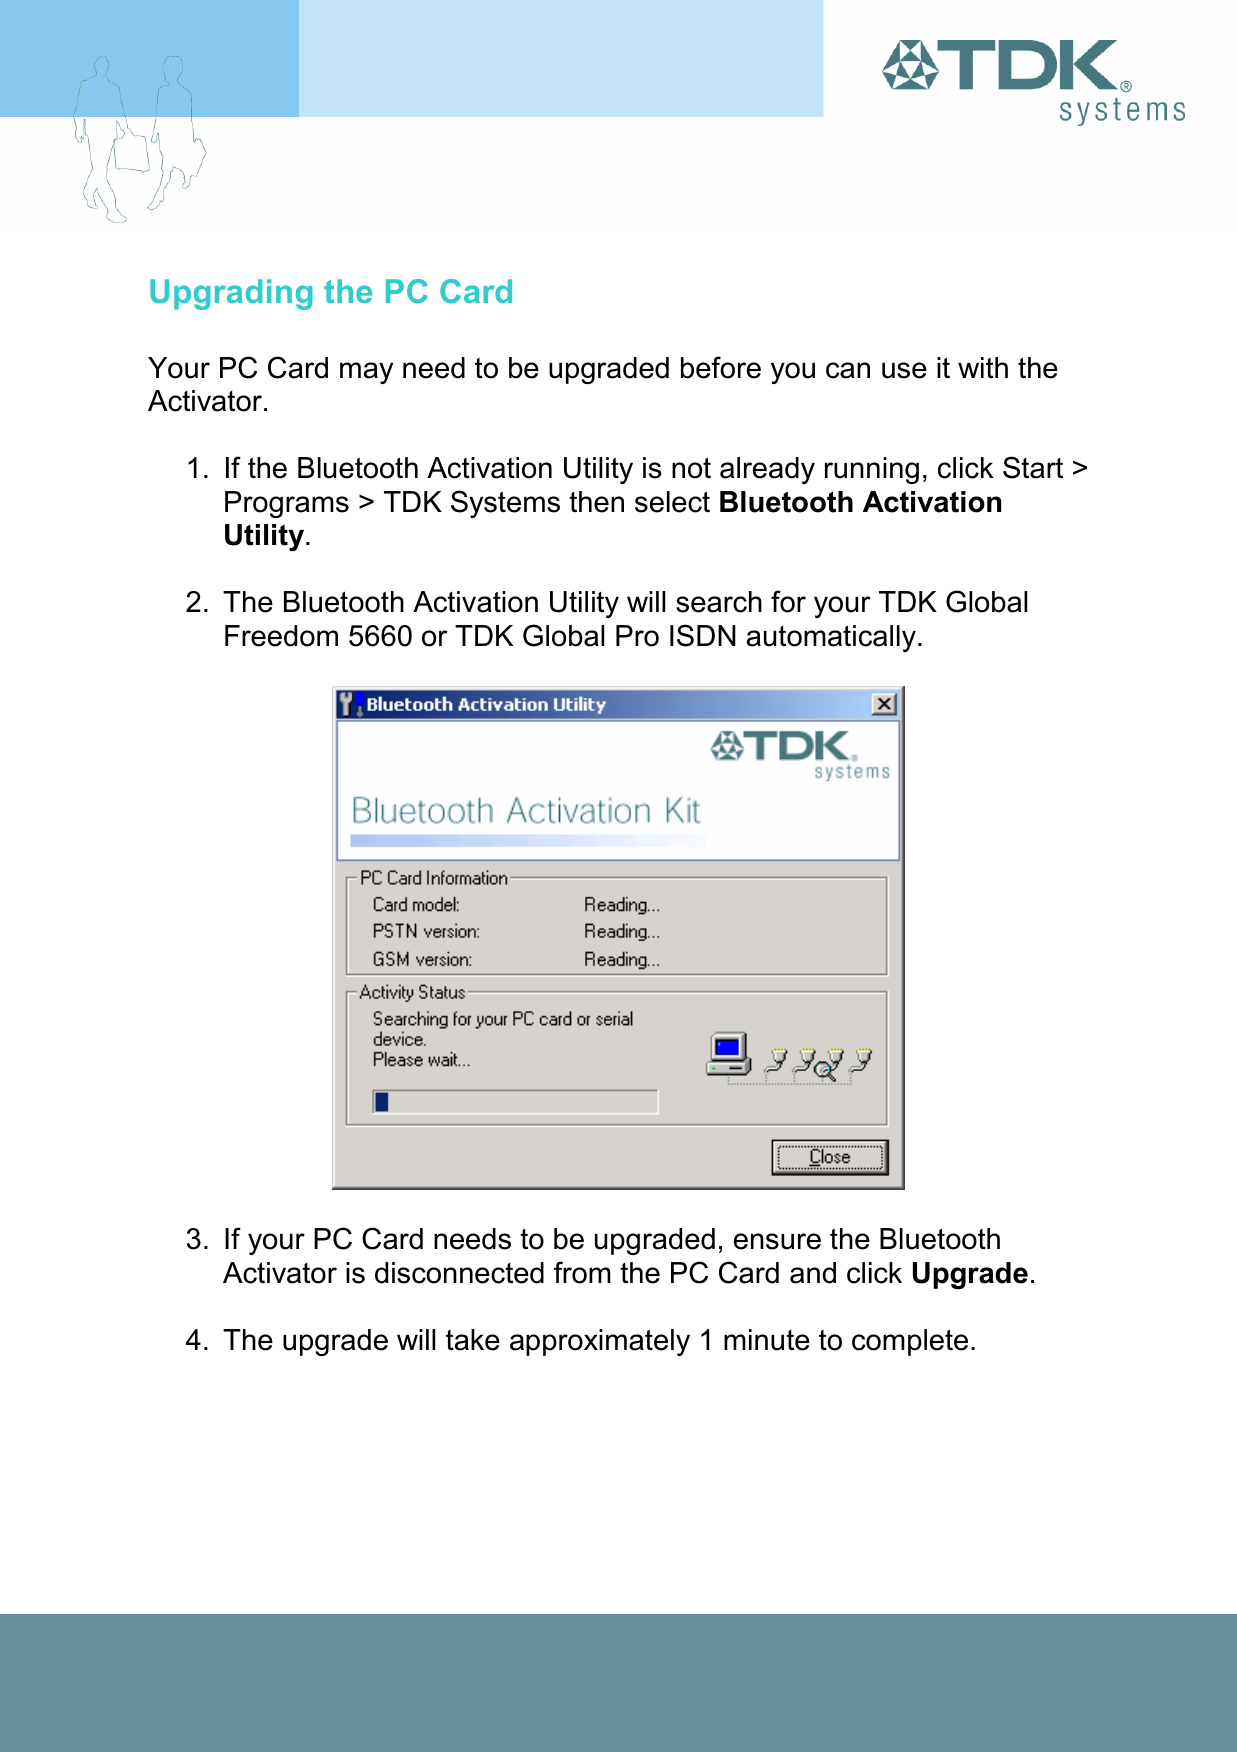 Upgrading the PC Card  Your PC Card may need to be upgraded before you can use it with the Activator.  1.  If the Bluetooth Activation Utility is not already running, click Start &gt; Programs &gt; TDK Systems then select Bluetooth Activation Utility.  2.  The Bluetooth Activation Utility will search for your TDK Global Freedom 5660 or TDK Global Pro ISDN automatically.    3.  If your PC Card needs to be upgraded, ensure the Bluetooth Activator is disconnected from the PC Card and click Upgrade.  4.  The upgrade will take approximately 1 minute to complete. 